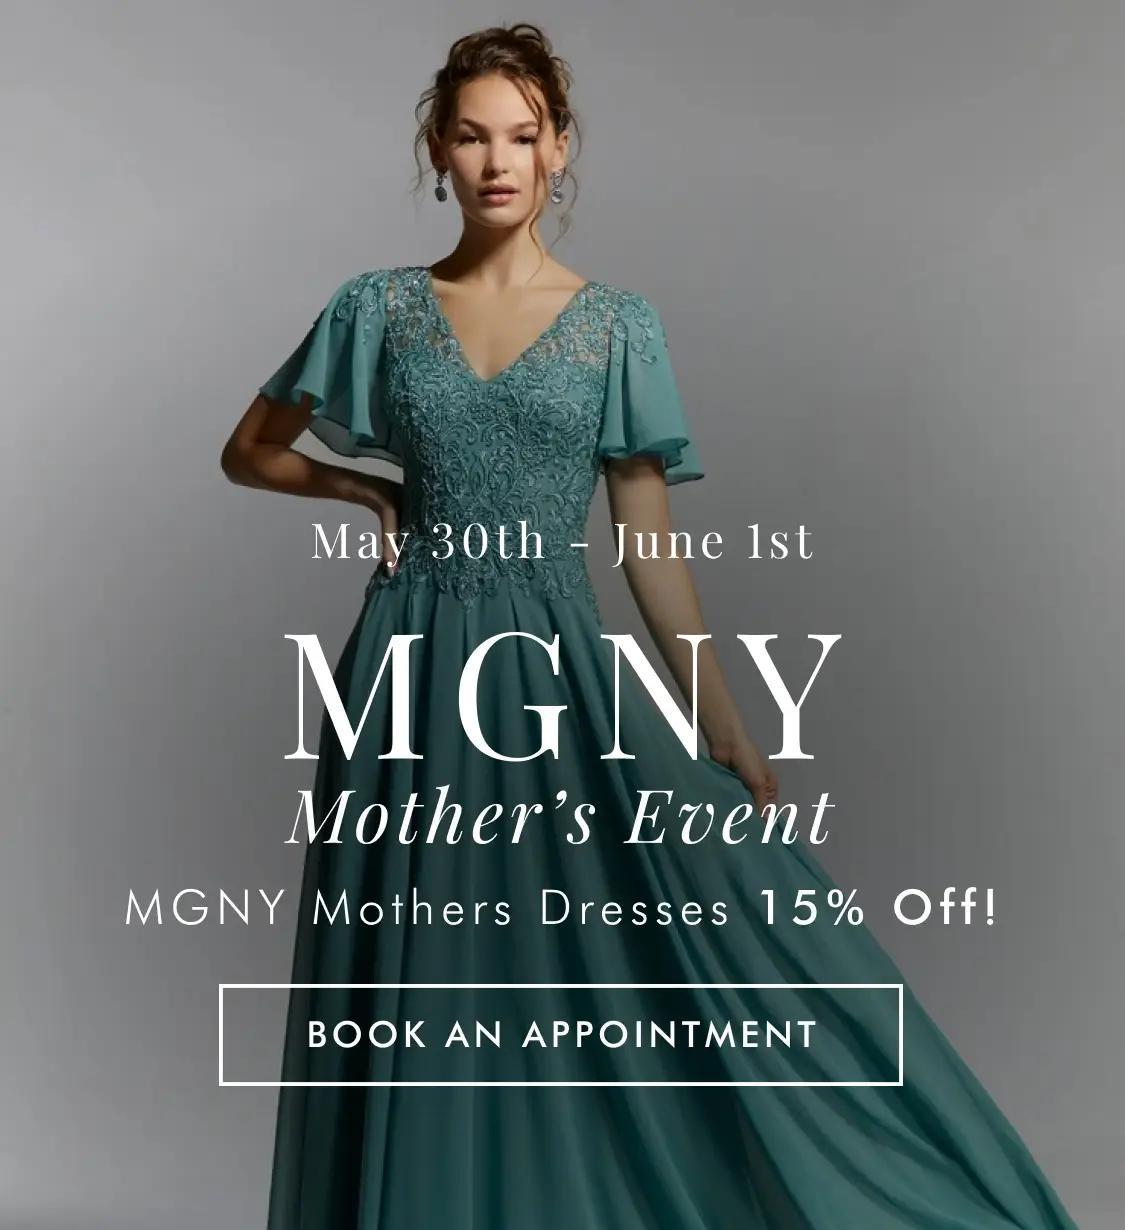 Mobile MGNY Mother's Event Banner